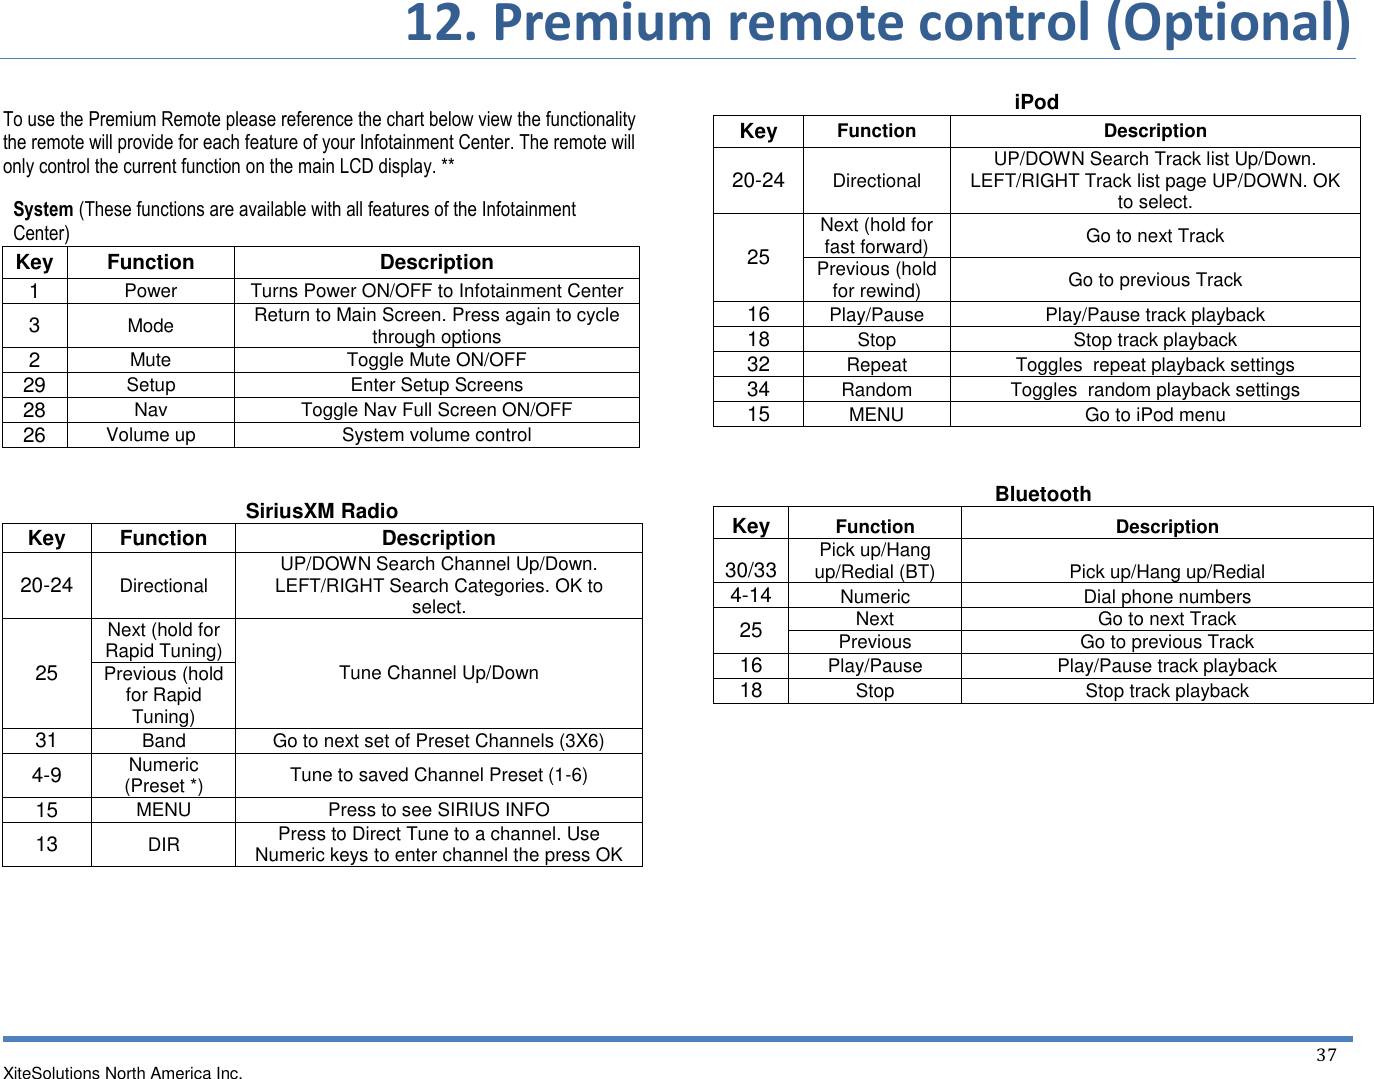       12. Premium remote control (Optional)   XiteSolutions North America Inc.  37   To use the Premium Remote please reference the chart below view the functionality the remote will provide for each feature of your Infotainment Center. The remote will only control the current function on the main LCD display. **  System (These functions are available with all features of the Infotainment Center) Key Function Description 1 Power Turns Power ON/OFF to Infotainment Center 3 Mode Return to Main Screen. Press again to cycle through options 2 Mute Toggle Mute ON/OFF 29 Setup Enter Setup Screens 28 Nav Toggle Nav Full Screen ON/OFF 26 Volume up System volume control   SiriusXM Radio Key Function Description 20-24 Directional UP/DOWN Search Channel Up/Down. LEFT/RIGHT Search Categories. OK to select. 25 Next (hold for Rapid Tuning) Tune Channel Up/Down Previous (hold for Rapid Tuning) 31 Band Go to next set of Preset Channels (3X6) 4-9 Numeric  (Preset *) Tune to saved Channel Preset (1-6) 15 MENU Press to see SIRIUS INFO 13 DIR Press to Direct Tune to a channel. Use Numeric keys to enter channel the press OK        iPod Key Function Description 20-24 Directional UP/DOWN Search Track list Up/Down. LEFT/RIGHT Track list page UP/DOWN. OK to select. 25 Next (hold for fast forward) Go to next Track Previous (hold for rewind) Go to previous Track 16 Play/Pause Play/Pause track playback 18 Stop Stop track playback 32 Repeat Toggles  repeat playback settings 34 Random Toggles  random playback settings 15 MENU Go to iPod menu   Bluetooth Key Function Description 30/33 Pick up/Hang up/Redial (BT) Pick up/Hang up/Redial 4-14 Numeric Dial phone numbers 25 Next Go to next Track Previous Go to previous Track 16 Play/Pause Play/Pause track playback 18 Stop Stop track playback              